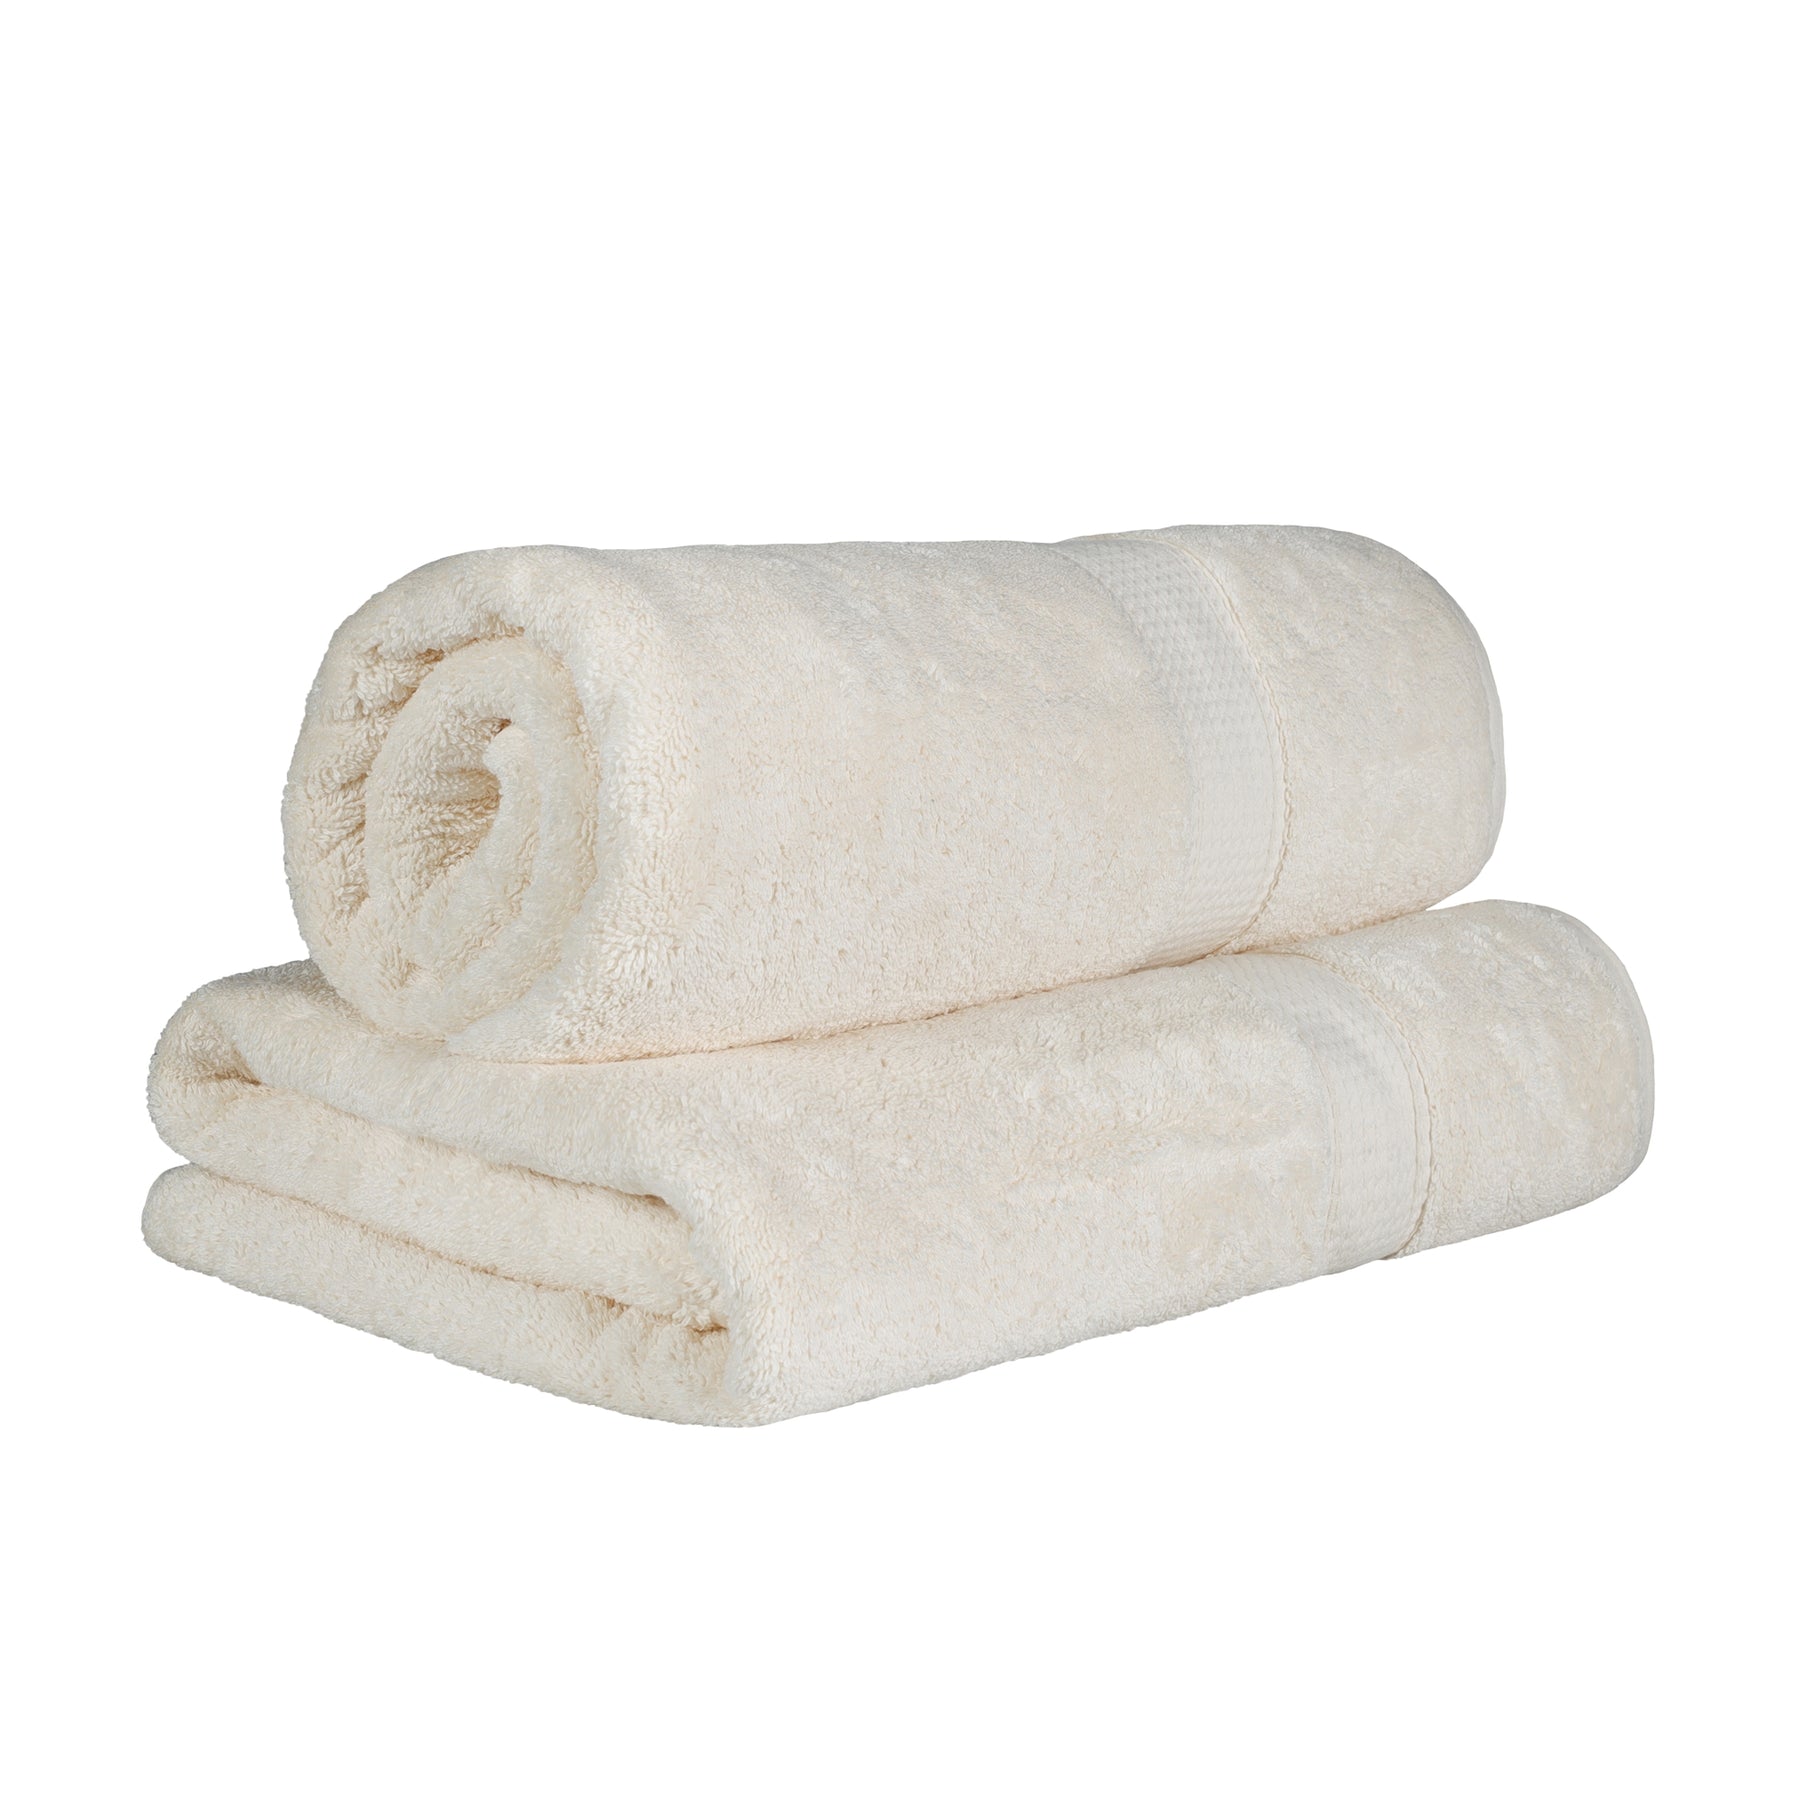 Egyptian Cotton Highly Absorbent 2 Piece Ultra-Plush Solid Bath Sheet Set - Cream